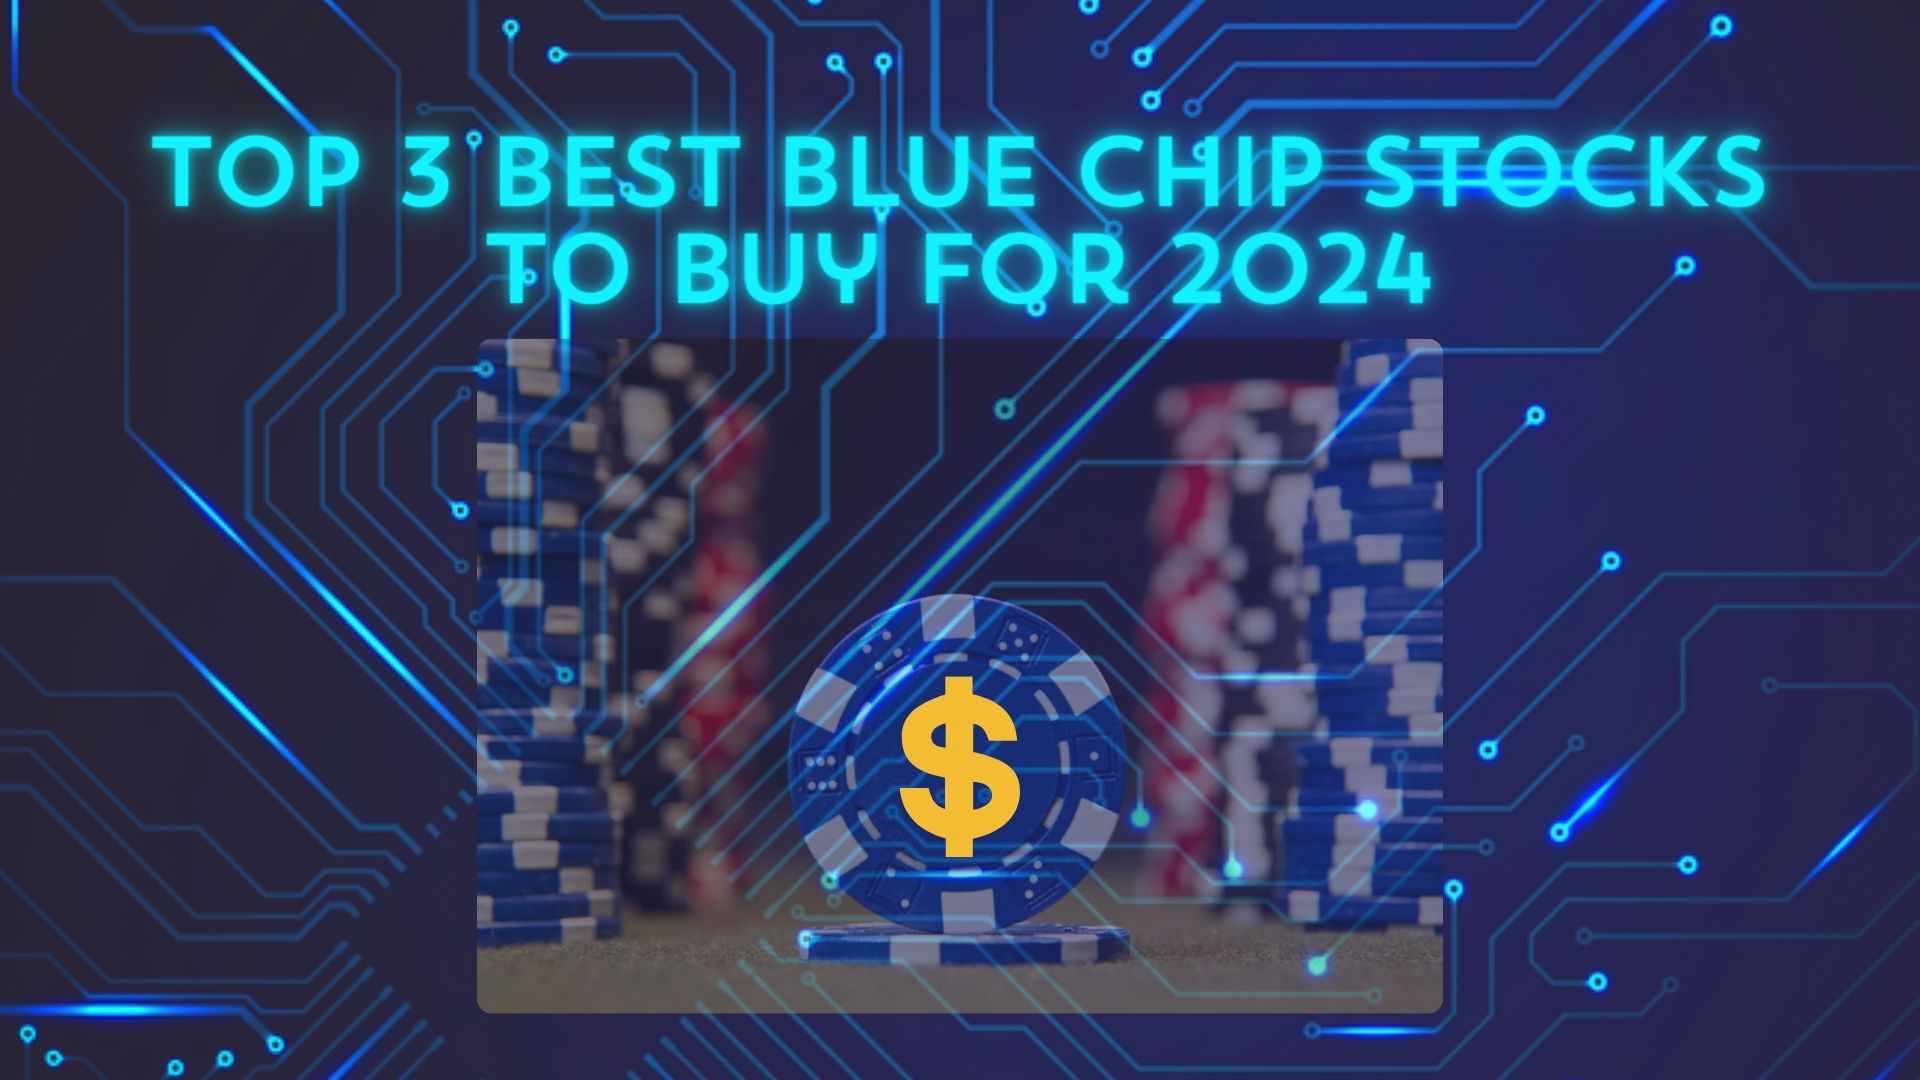 Top 3 Best Blue Chip Stocks to Buy For 2024